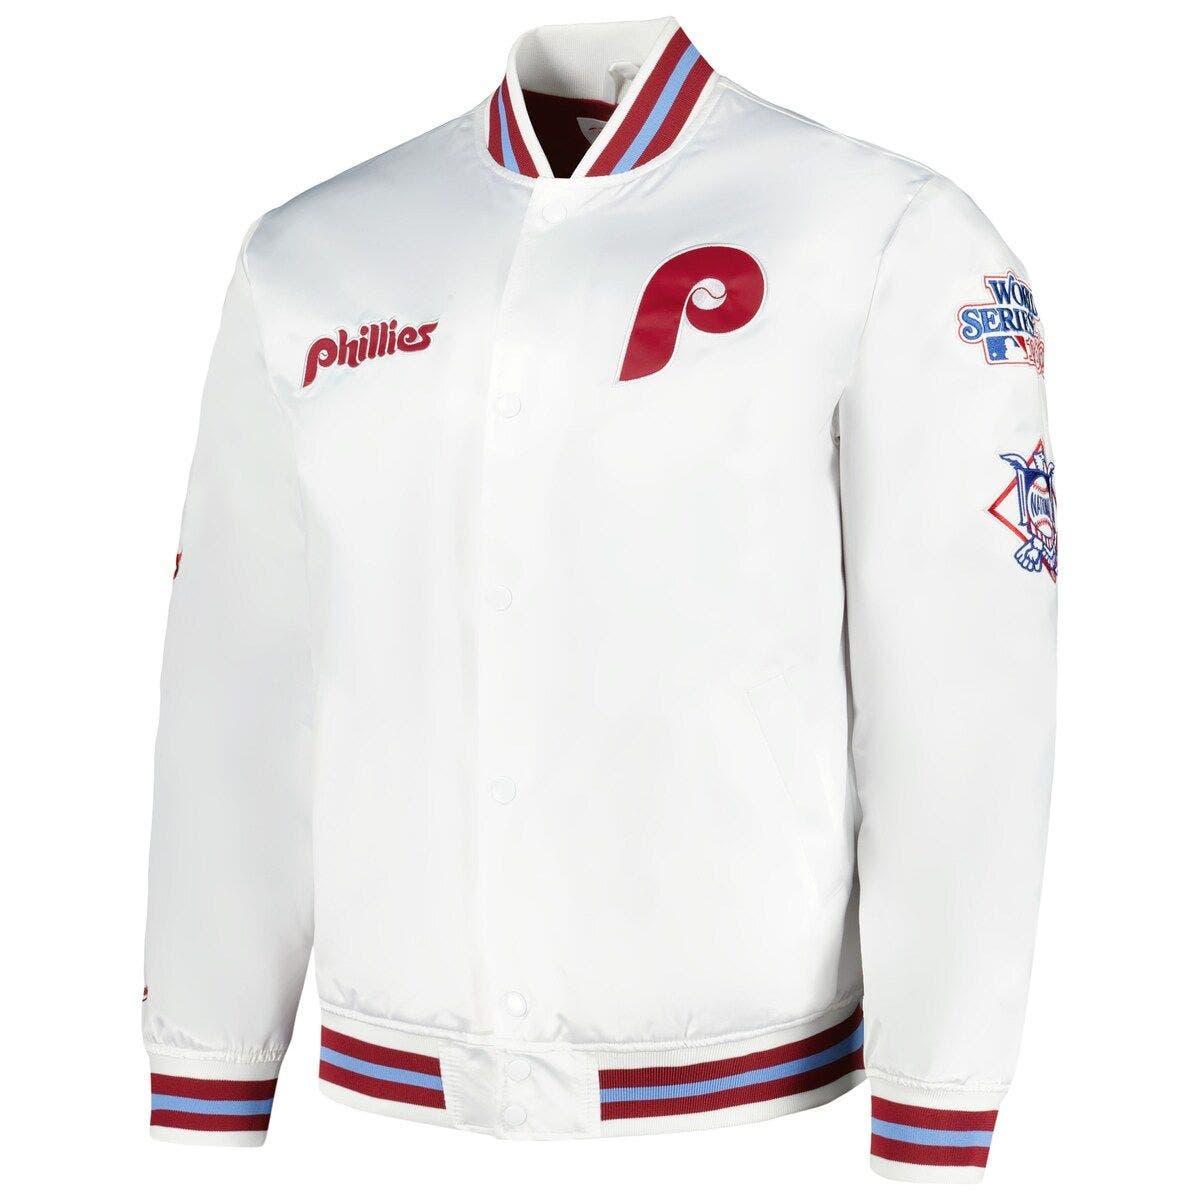 Men's Mitchell & Ness White St. Louis Cardinals City Collection Satin Full-Snap Varsity Jacket Size: Small